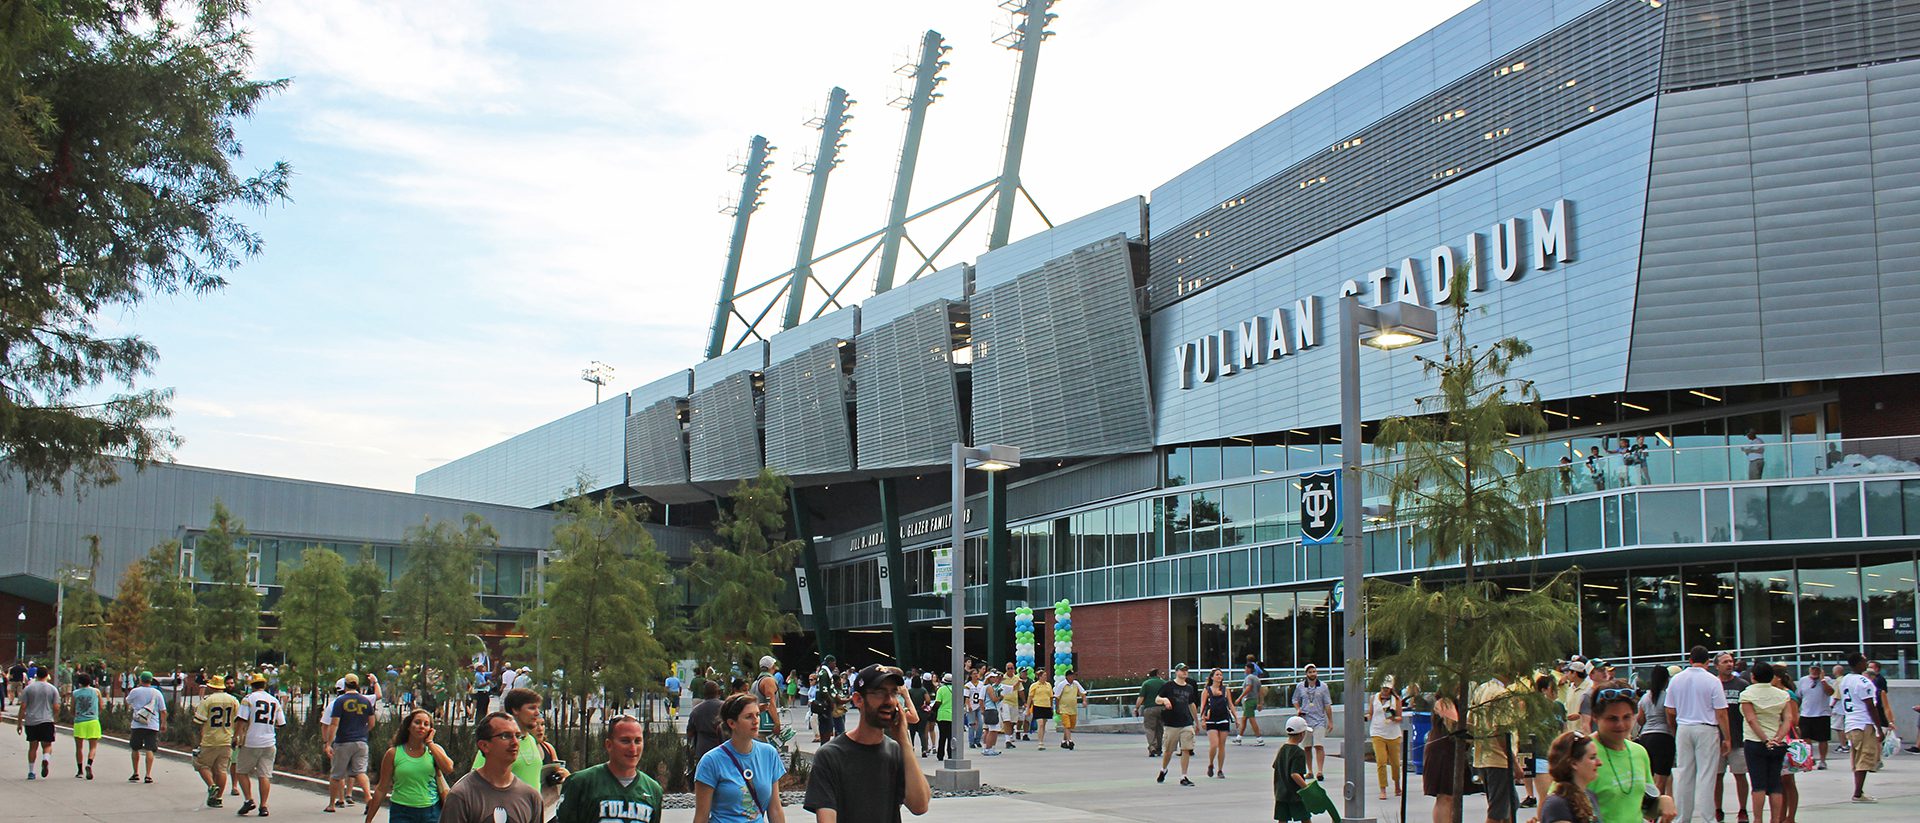 Image of crowds of people in the Yulman Stadium entry plaza